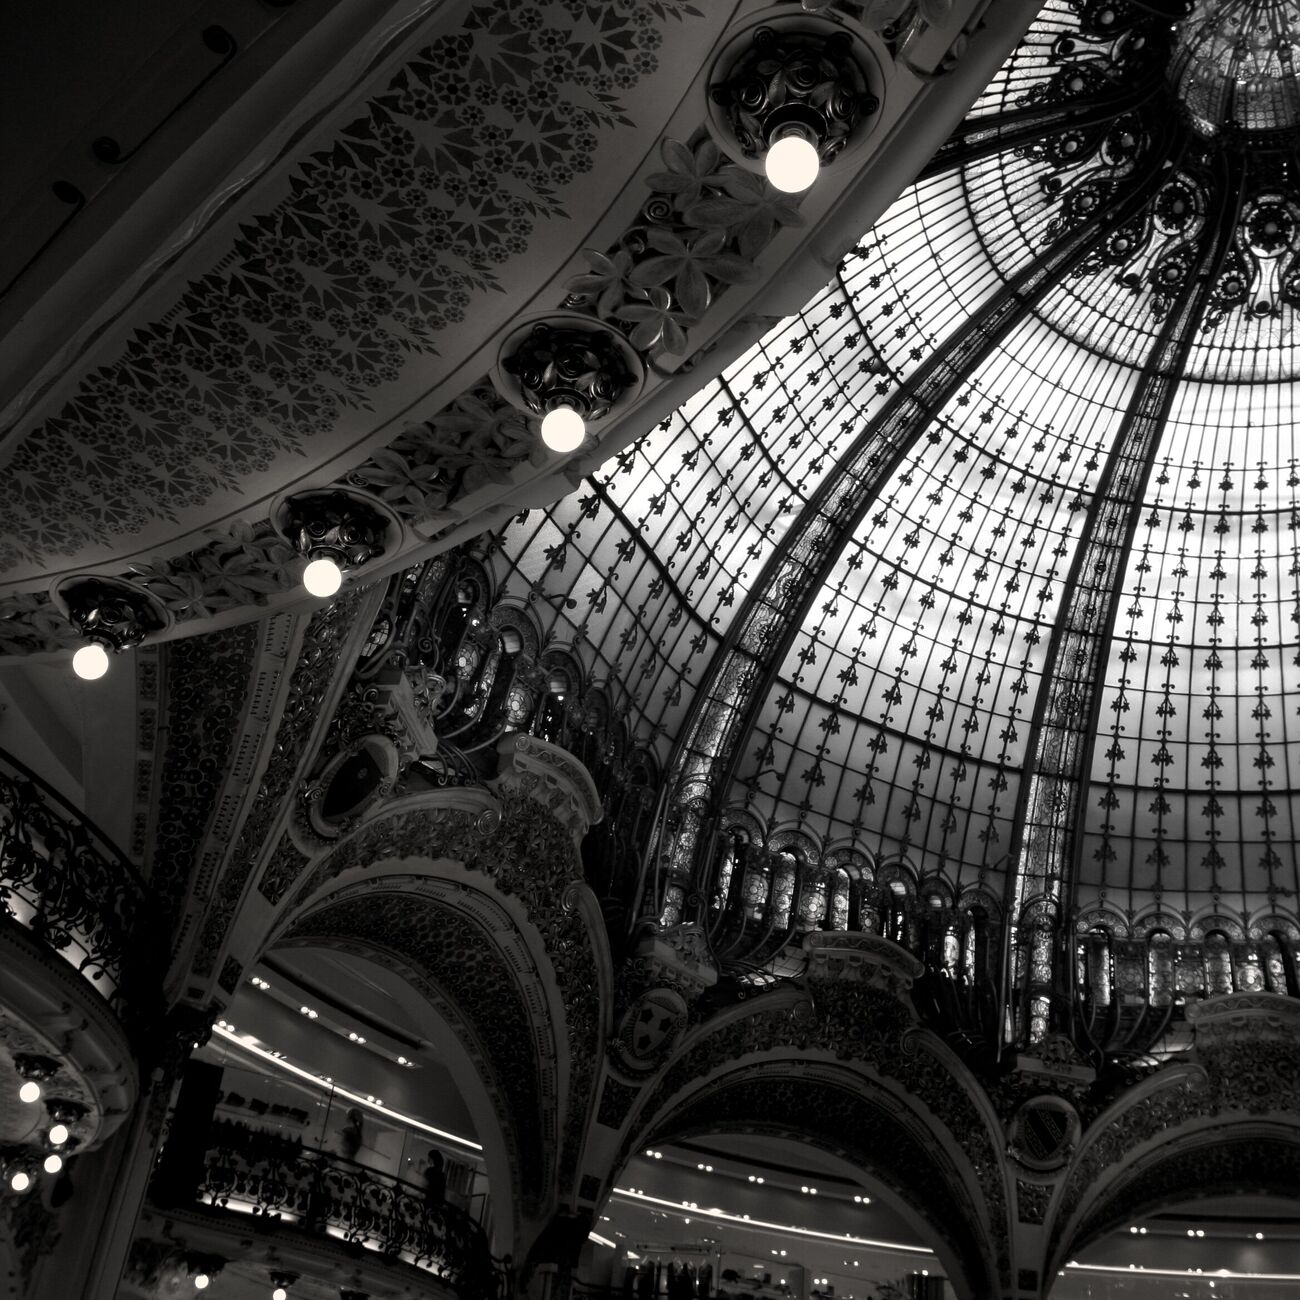 Photograph print 5.1 x 5.1 in, Galeries Lafayette. Ref-545-19 - Denis Olivier Art Photography